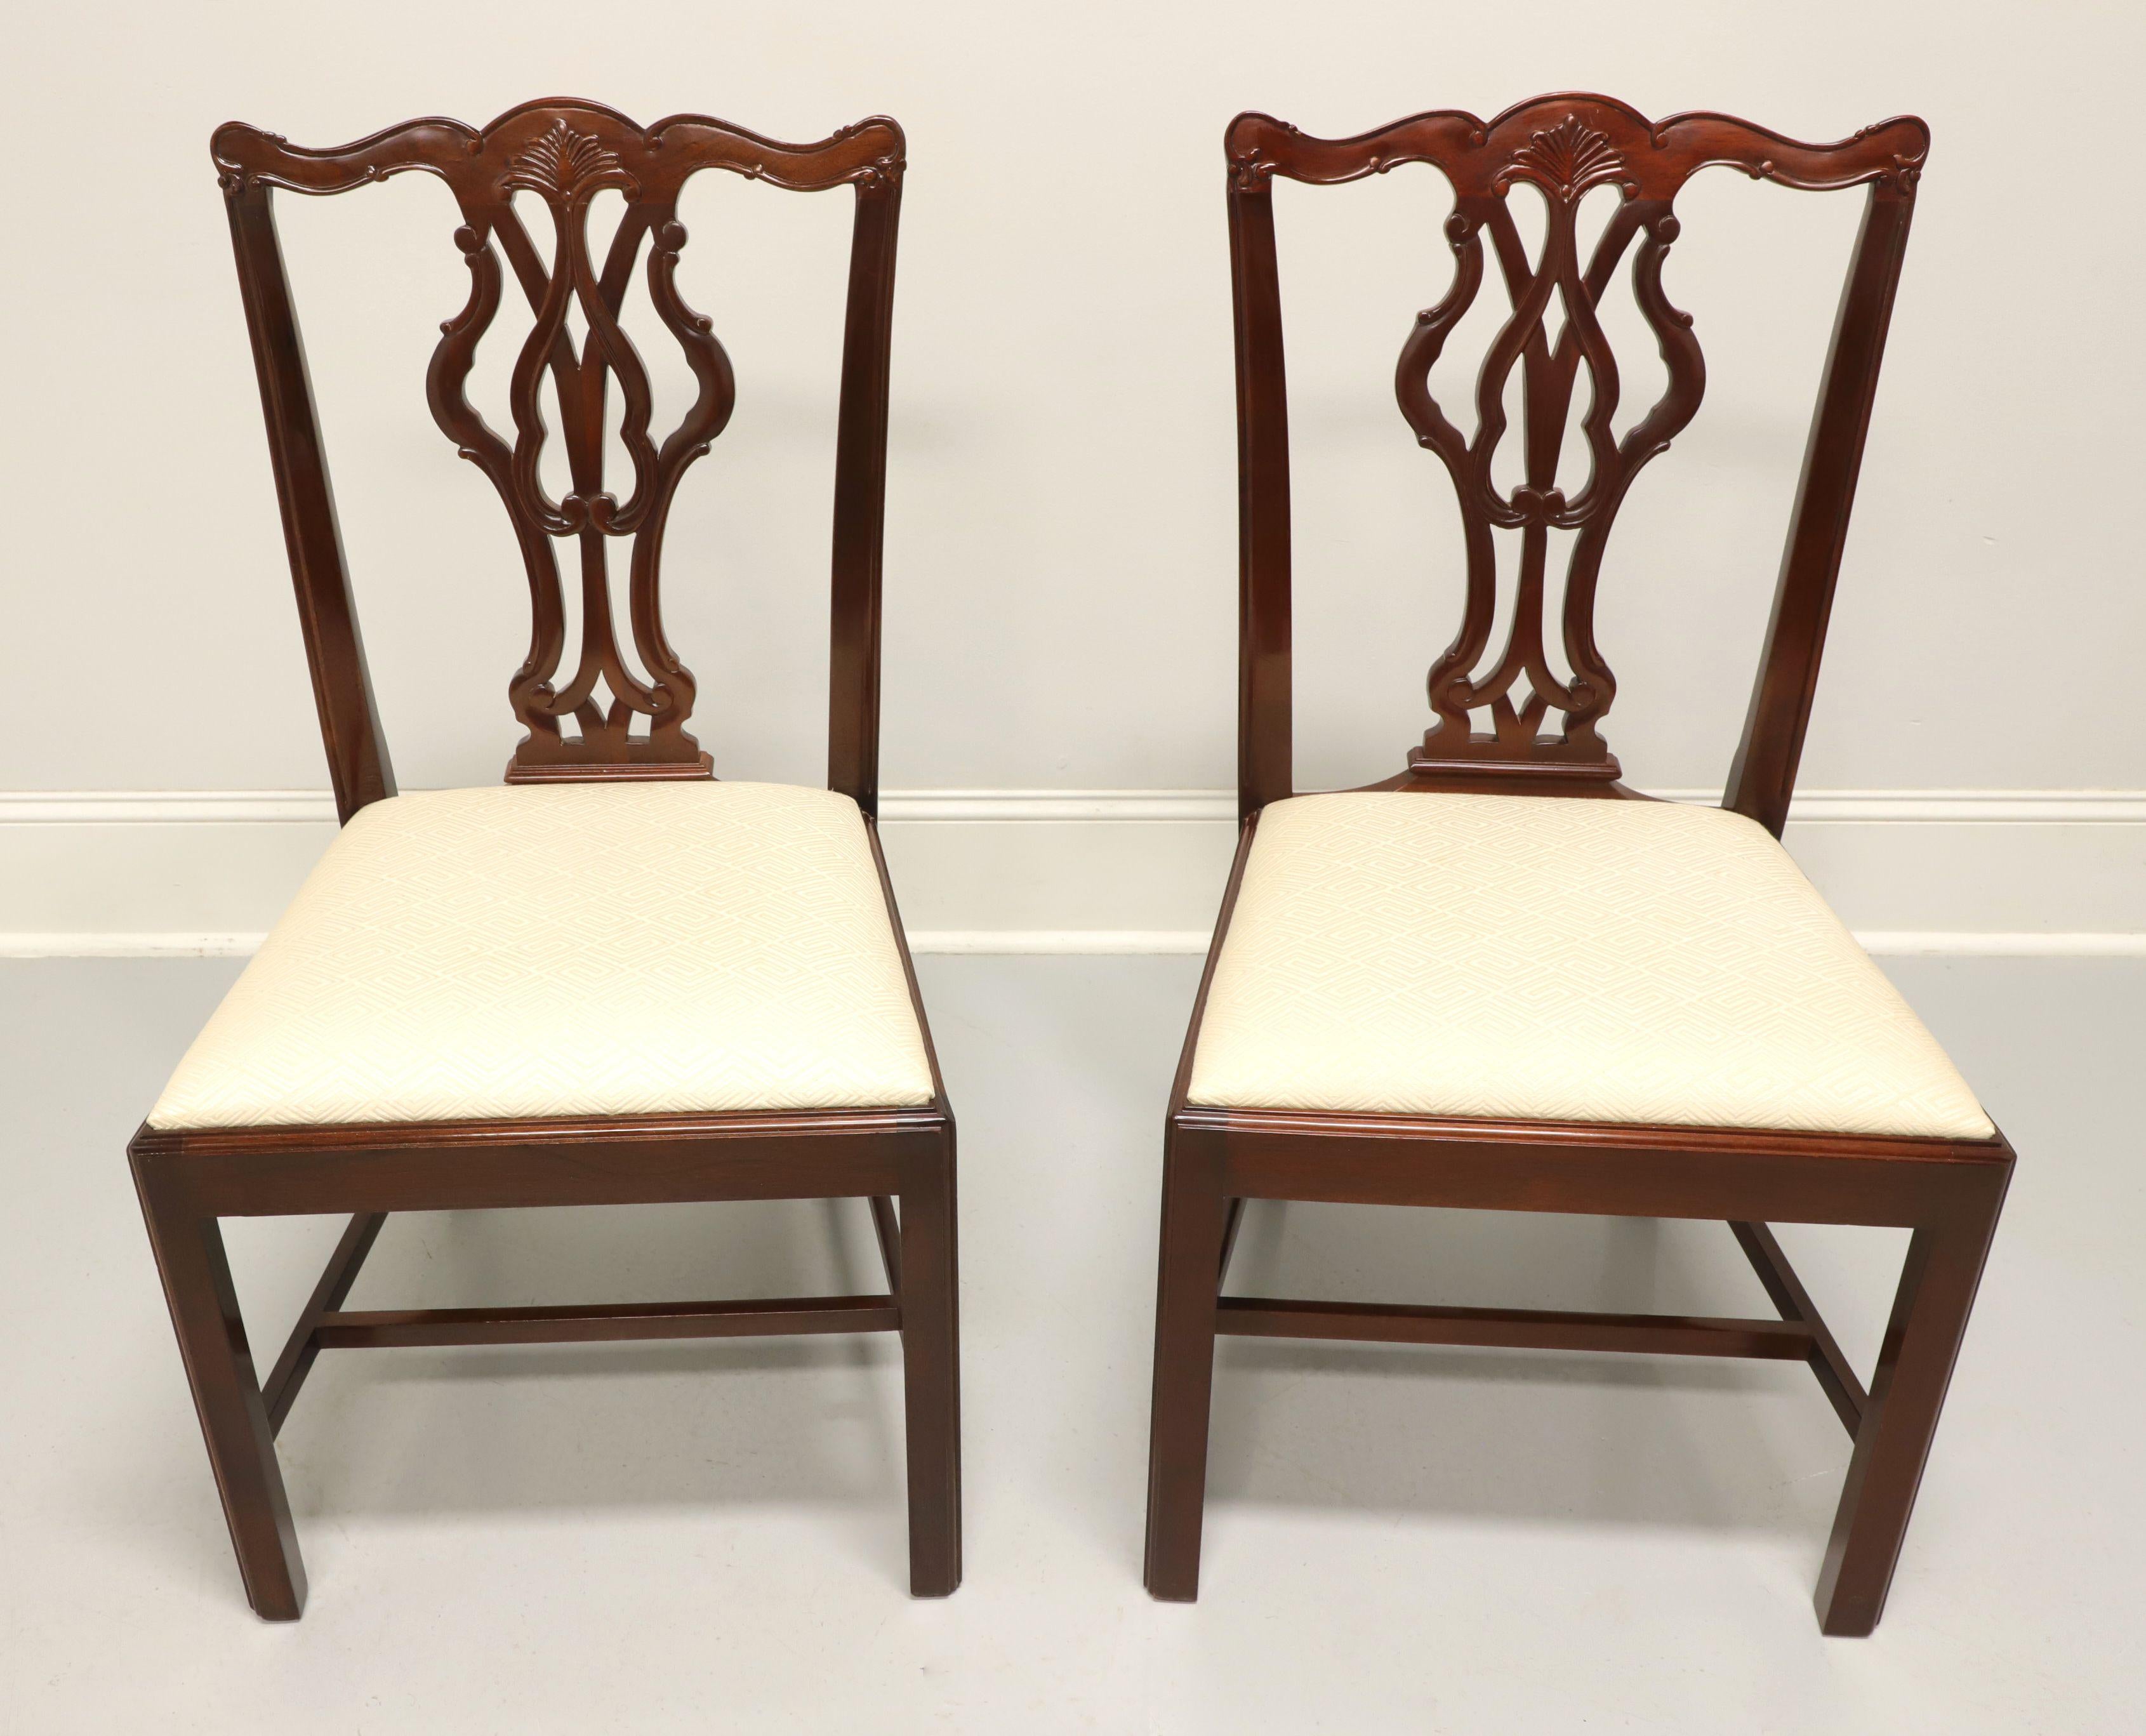 A pair of dining side chairs in the Chippendale style by Wellington Hall. Solid mahogany with carved crestrail, carved seat back, cream color geometric pattern upholstered seat, straight legs and stretchers. Made in North Carolina, USA, in the late